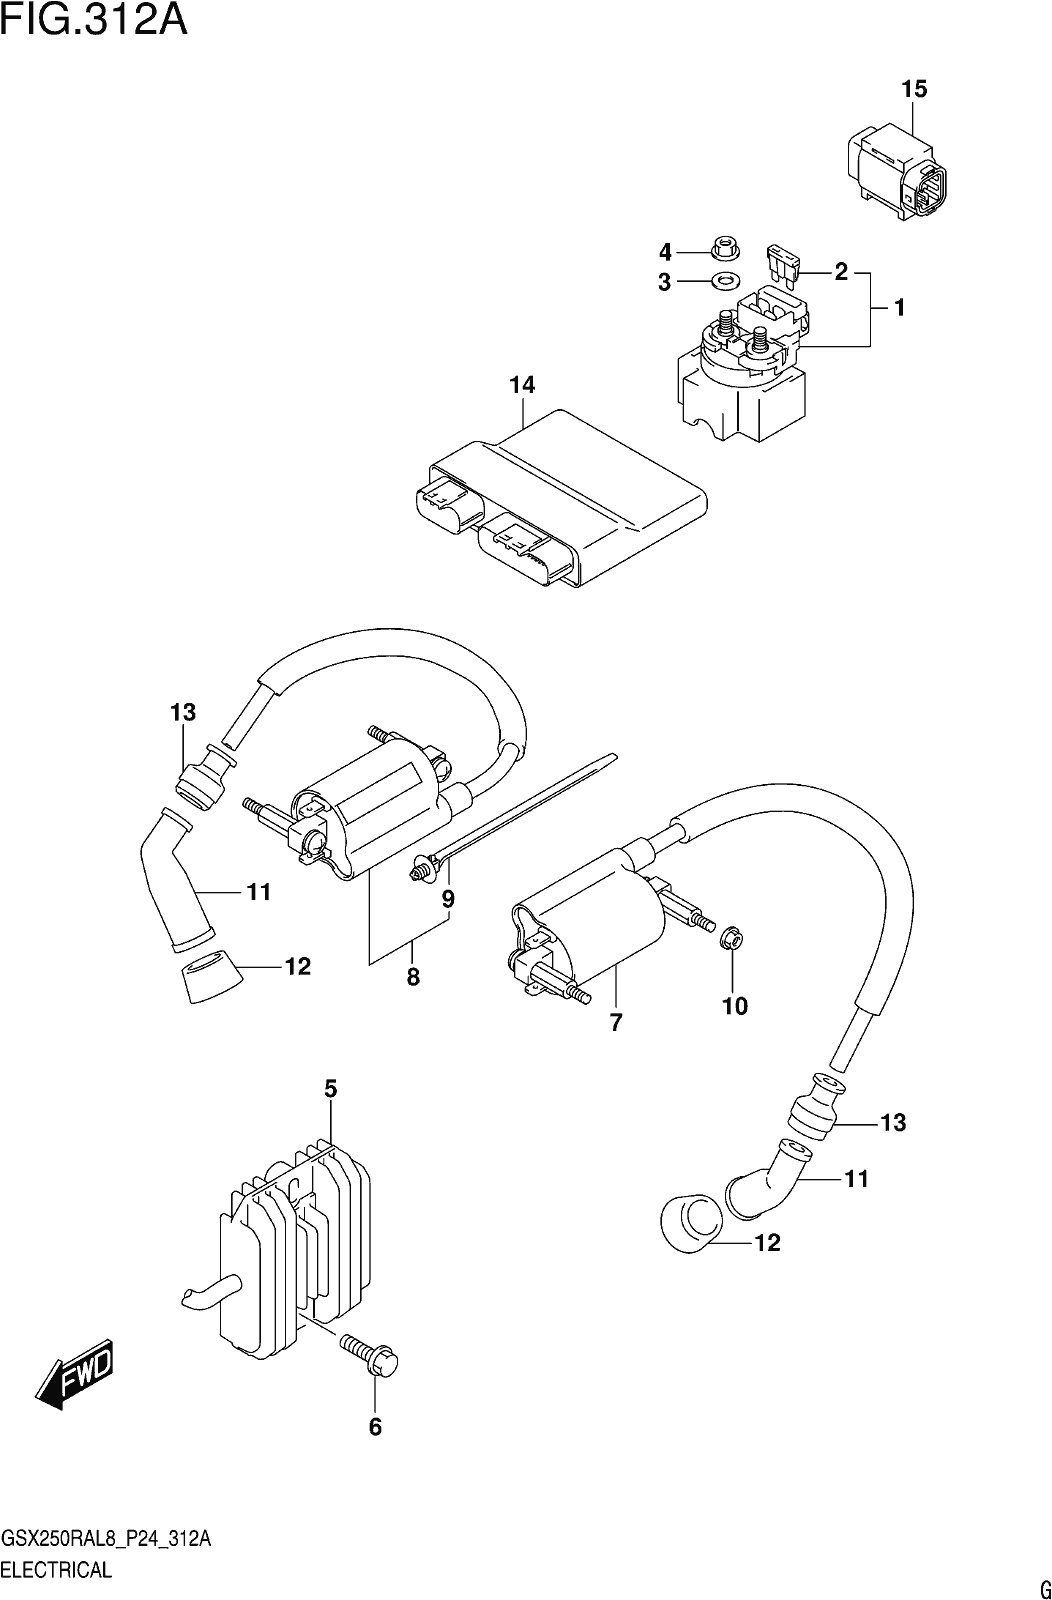 Fig.312a Electrical